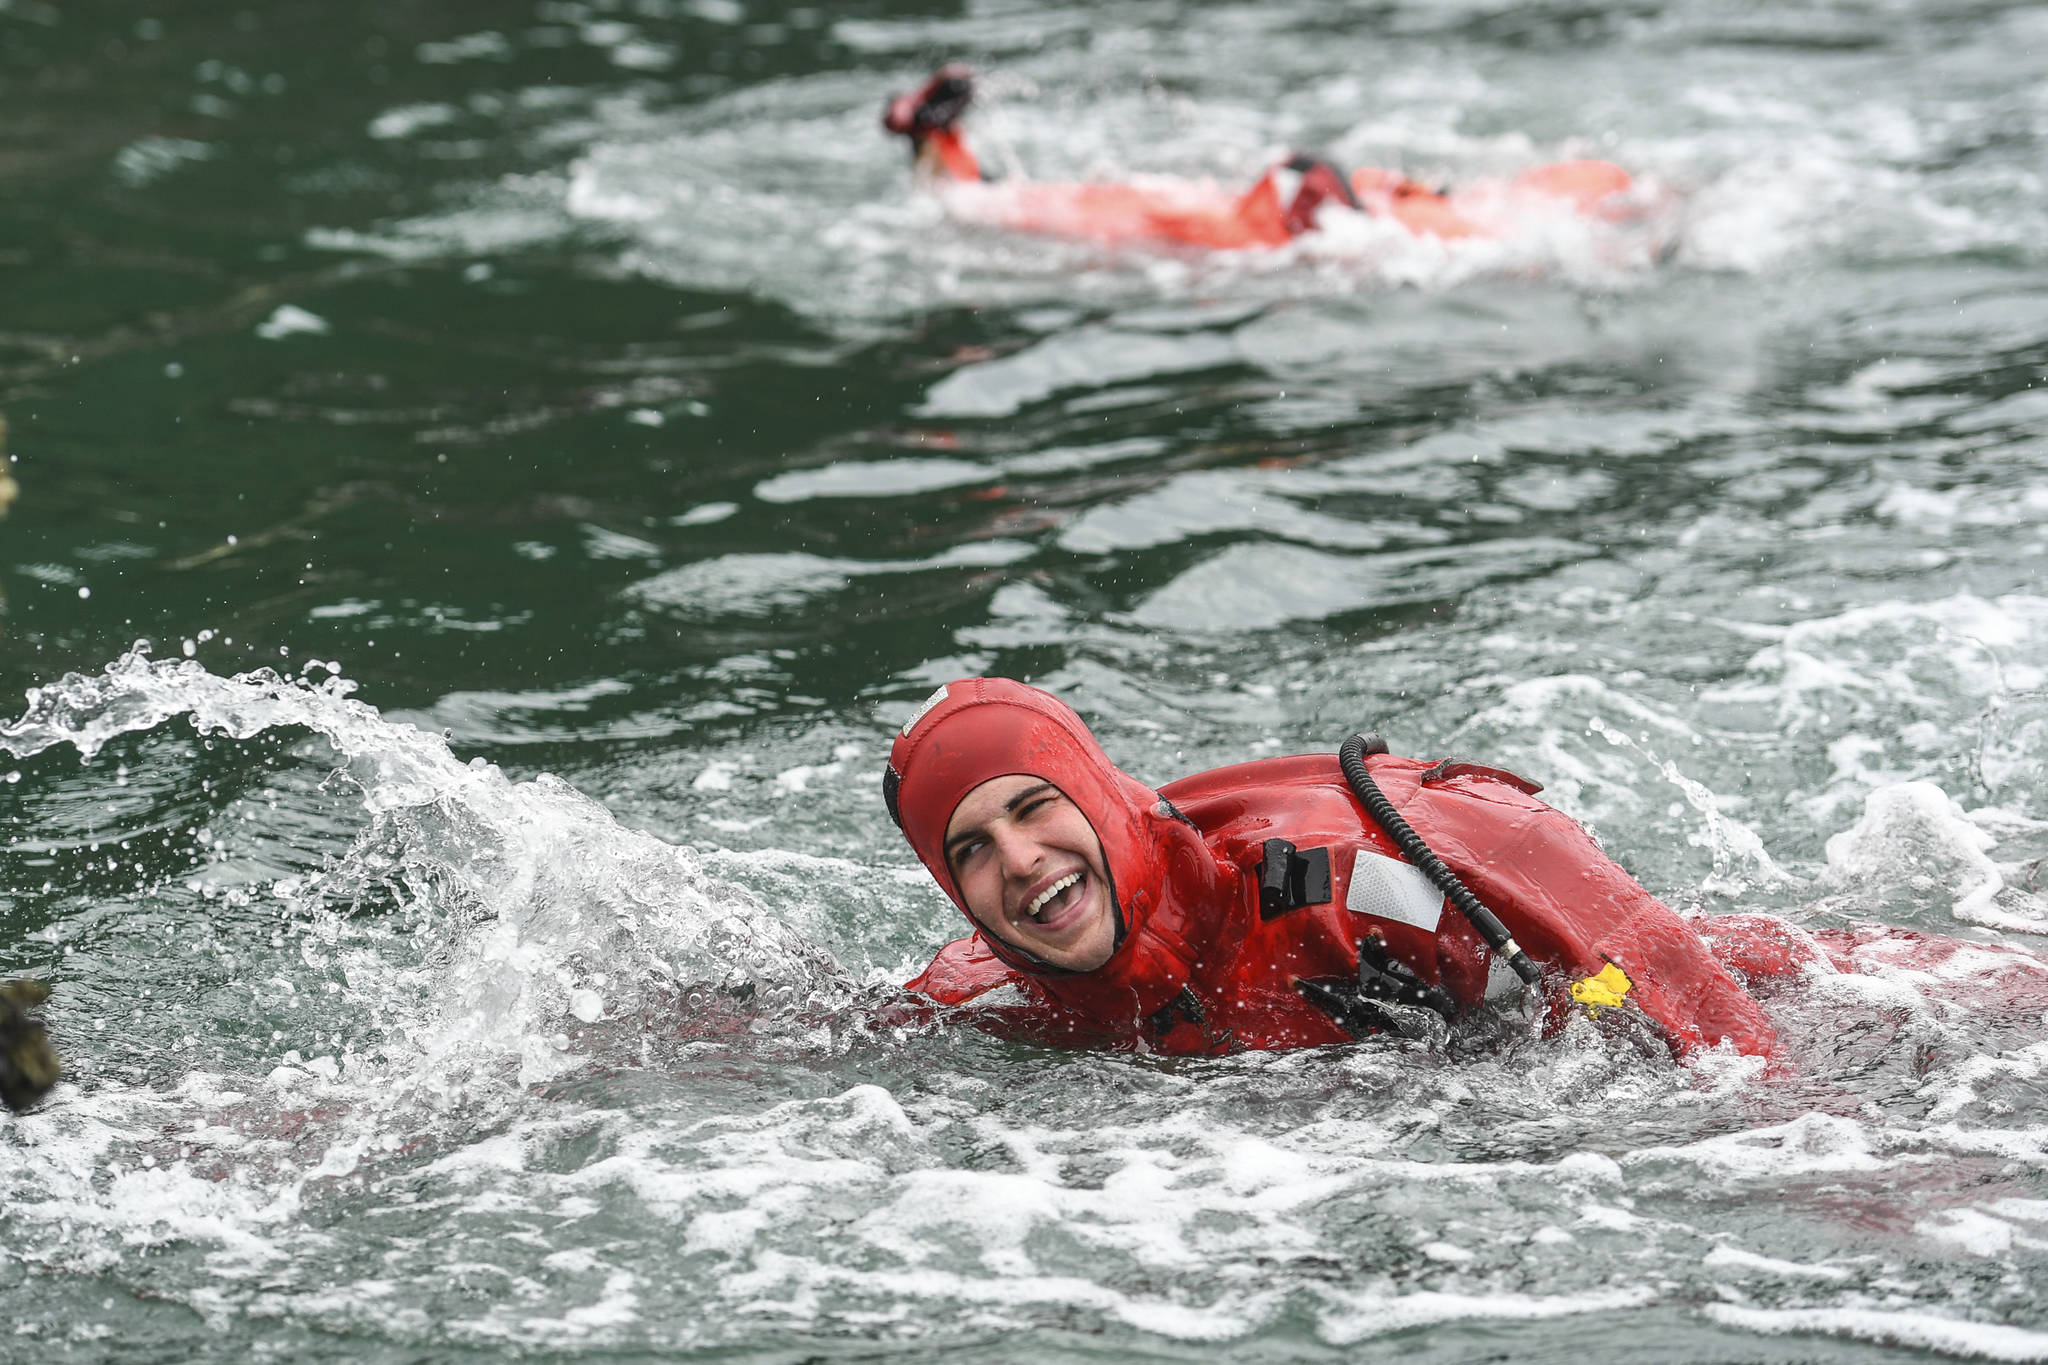 Seaman Weston Murdock of the U.S. Coast Guard Cutter Henry Blake, competes in the survival suit swim during the annual Buoy Tender Olympics at Station Juneau on Wednesday, Aug. 21, 2019. (Michael Penn | Juneau Empire)